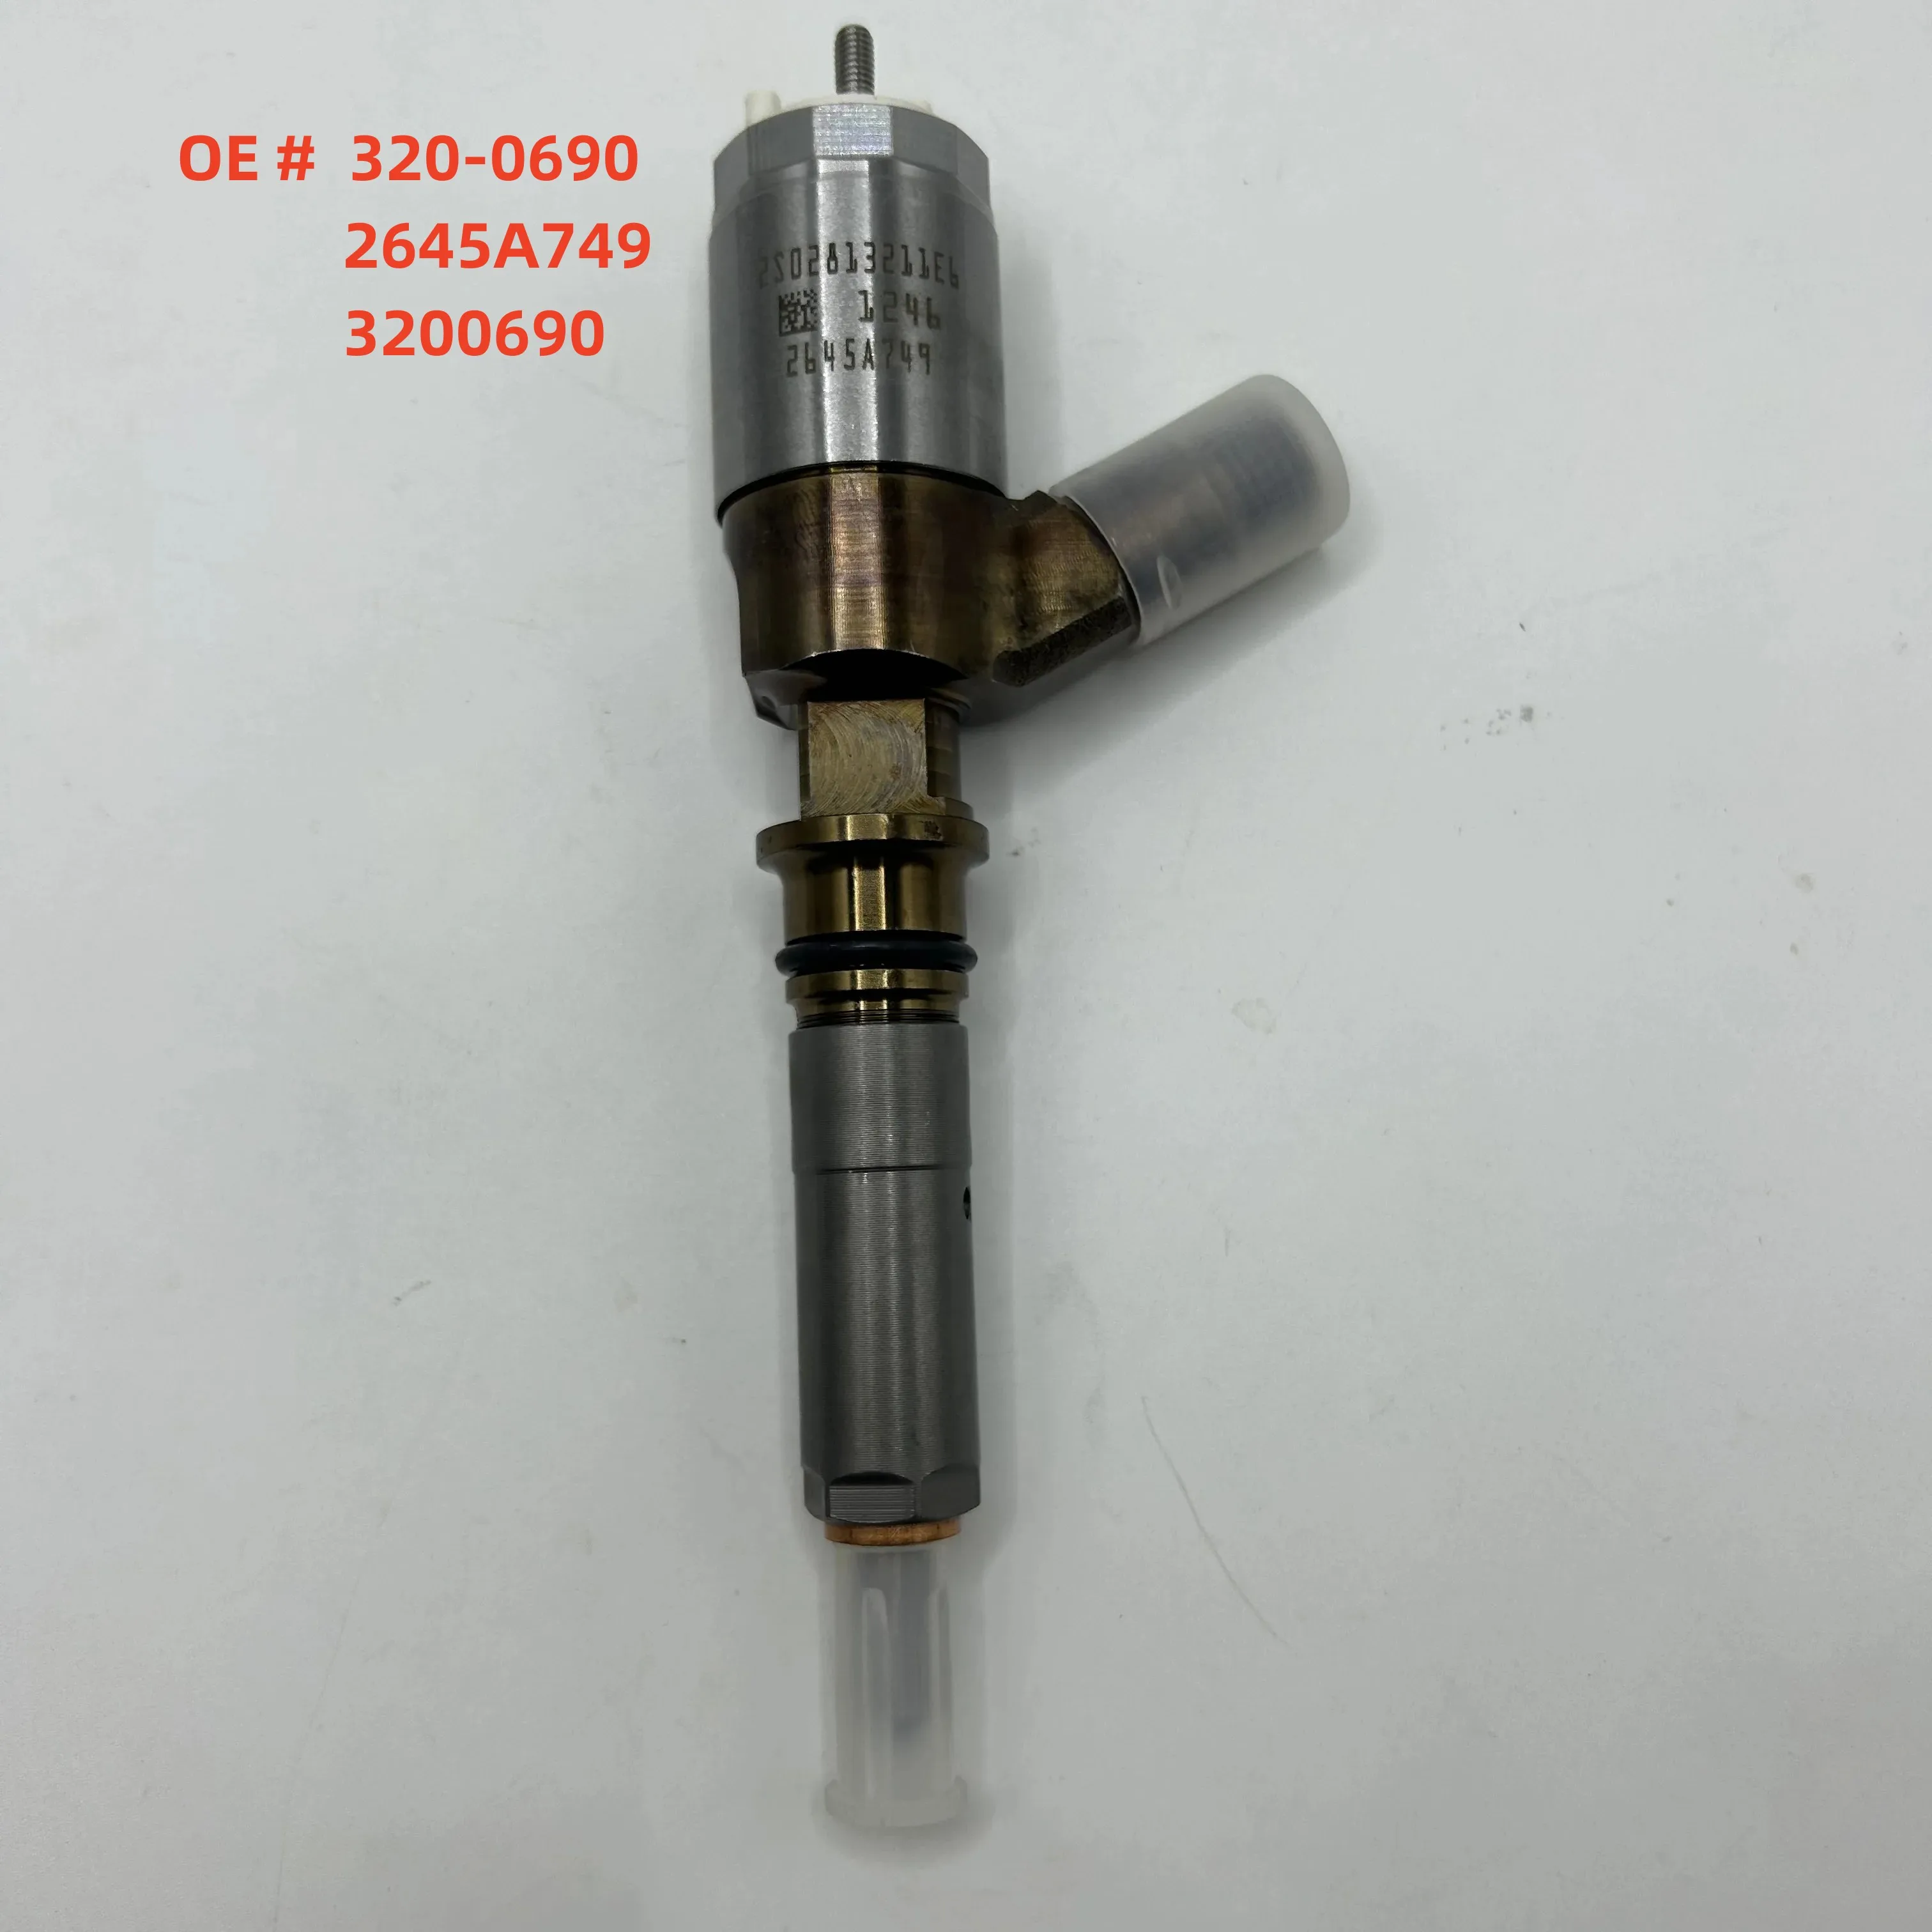 

High quality New 320-0690 2645A749 3200690 fuel injector for Caterpillar CAT 323D excavator Perkins engine C6.6